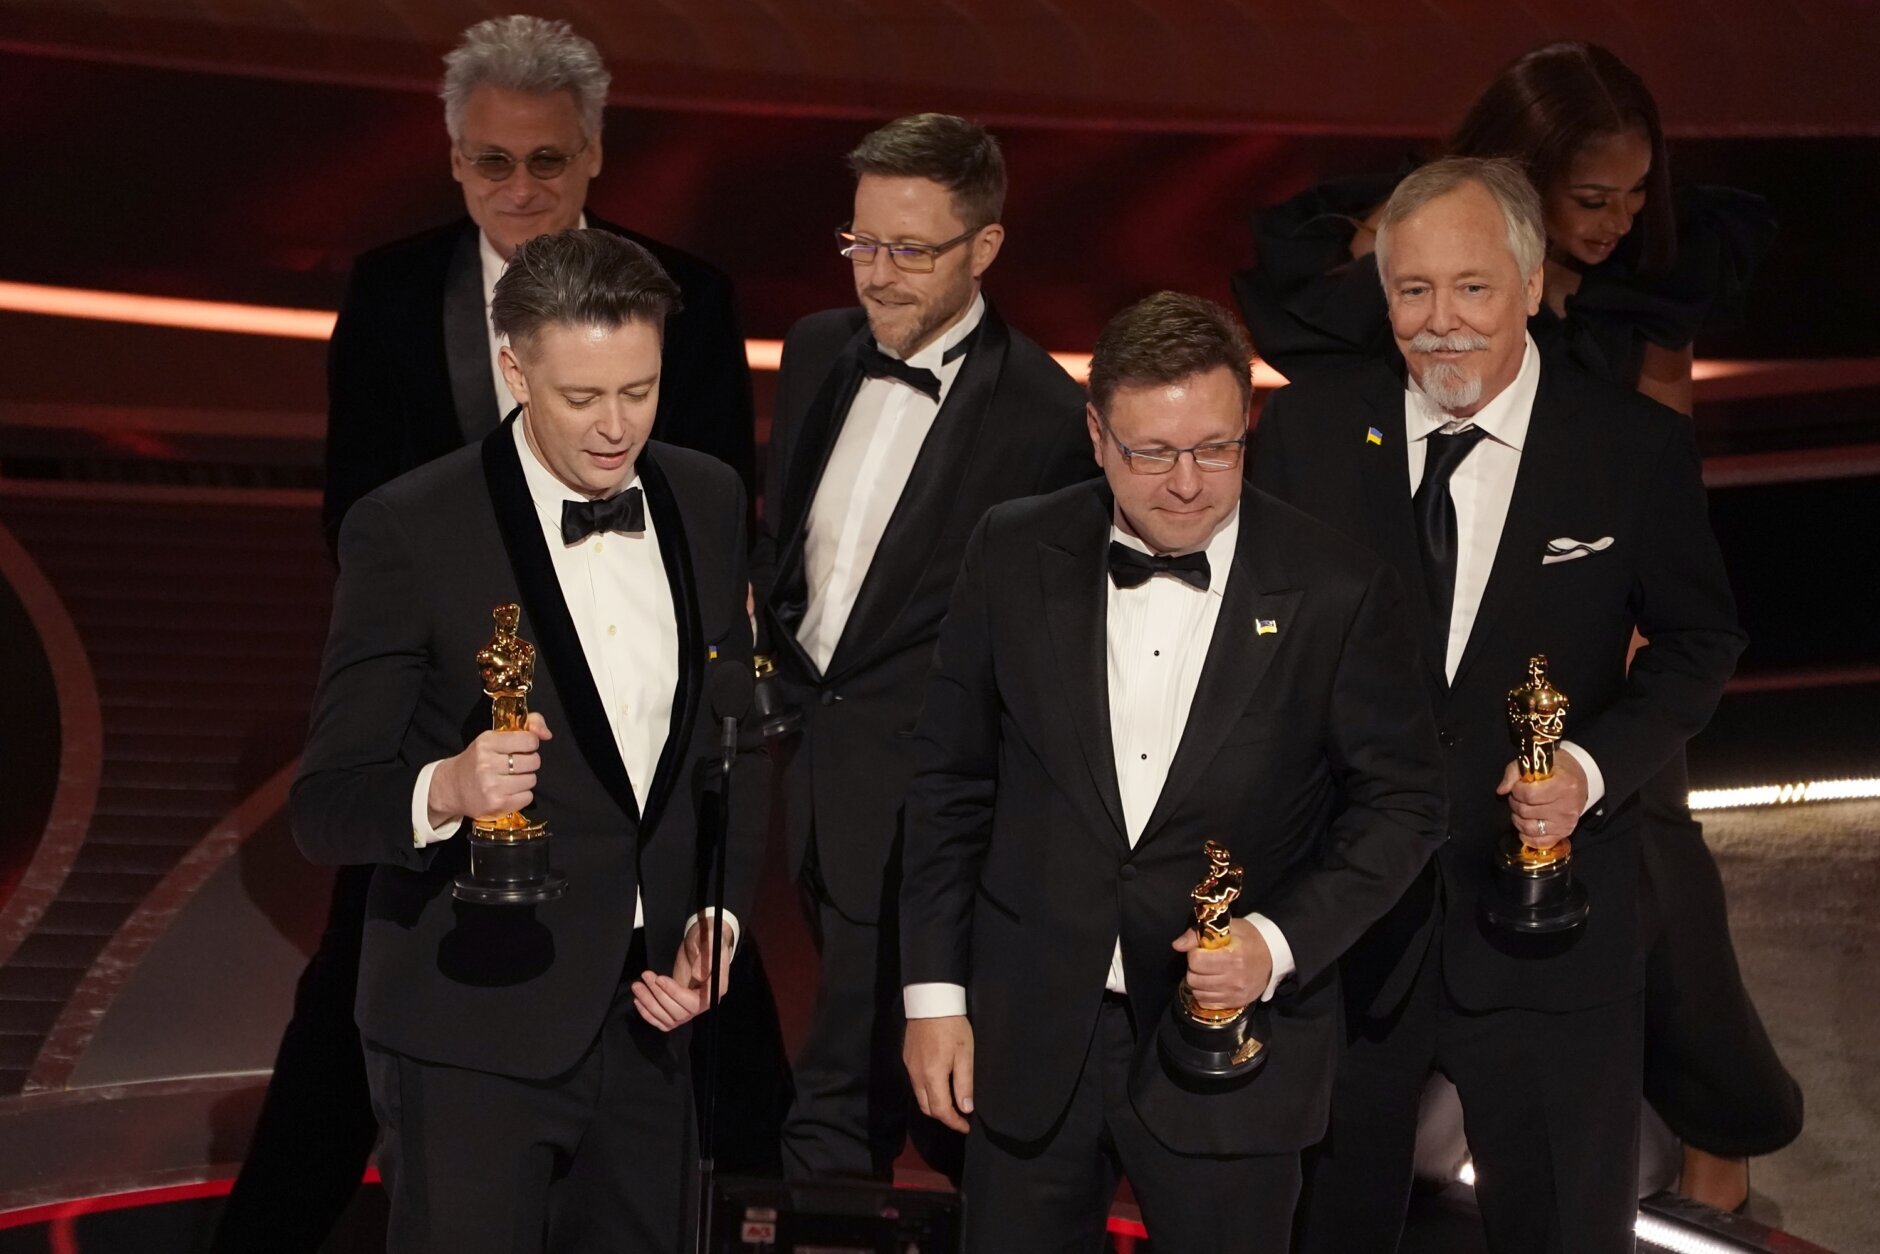 The team from "Dune" accept the award for best sound for "Dune" at the Oscars on Sunday, March 27, 2022, at the Dolby Theatre in Los Angeles. (AP Photo/Chris Pizzello)